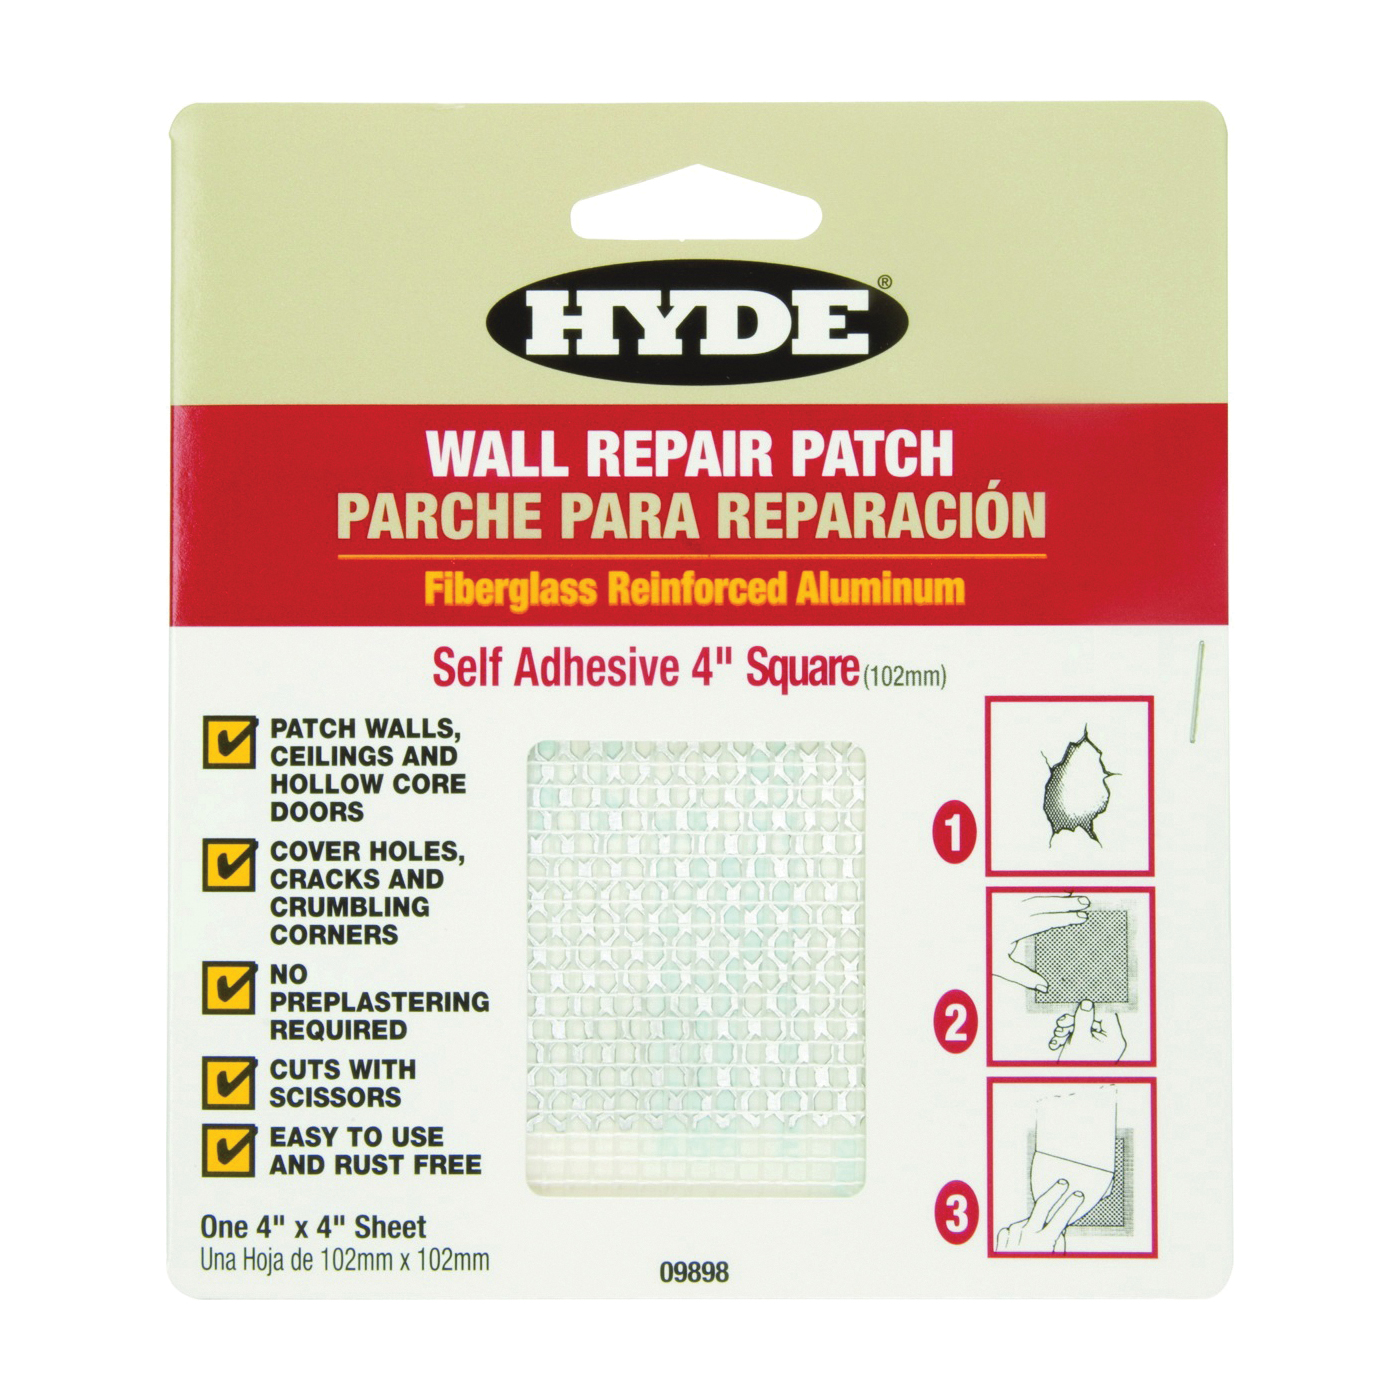 09898 Wall Patch